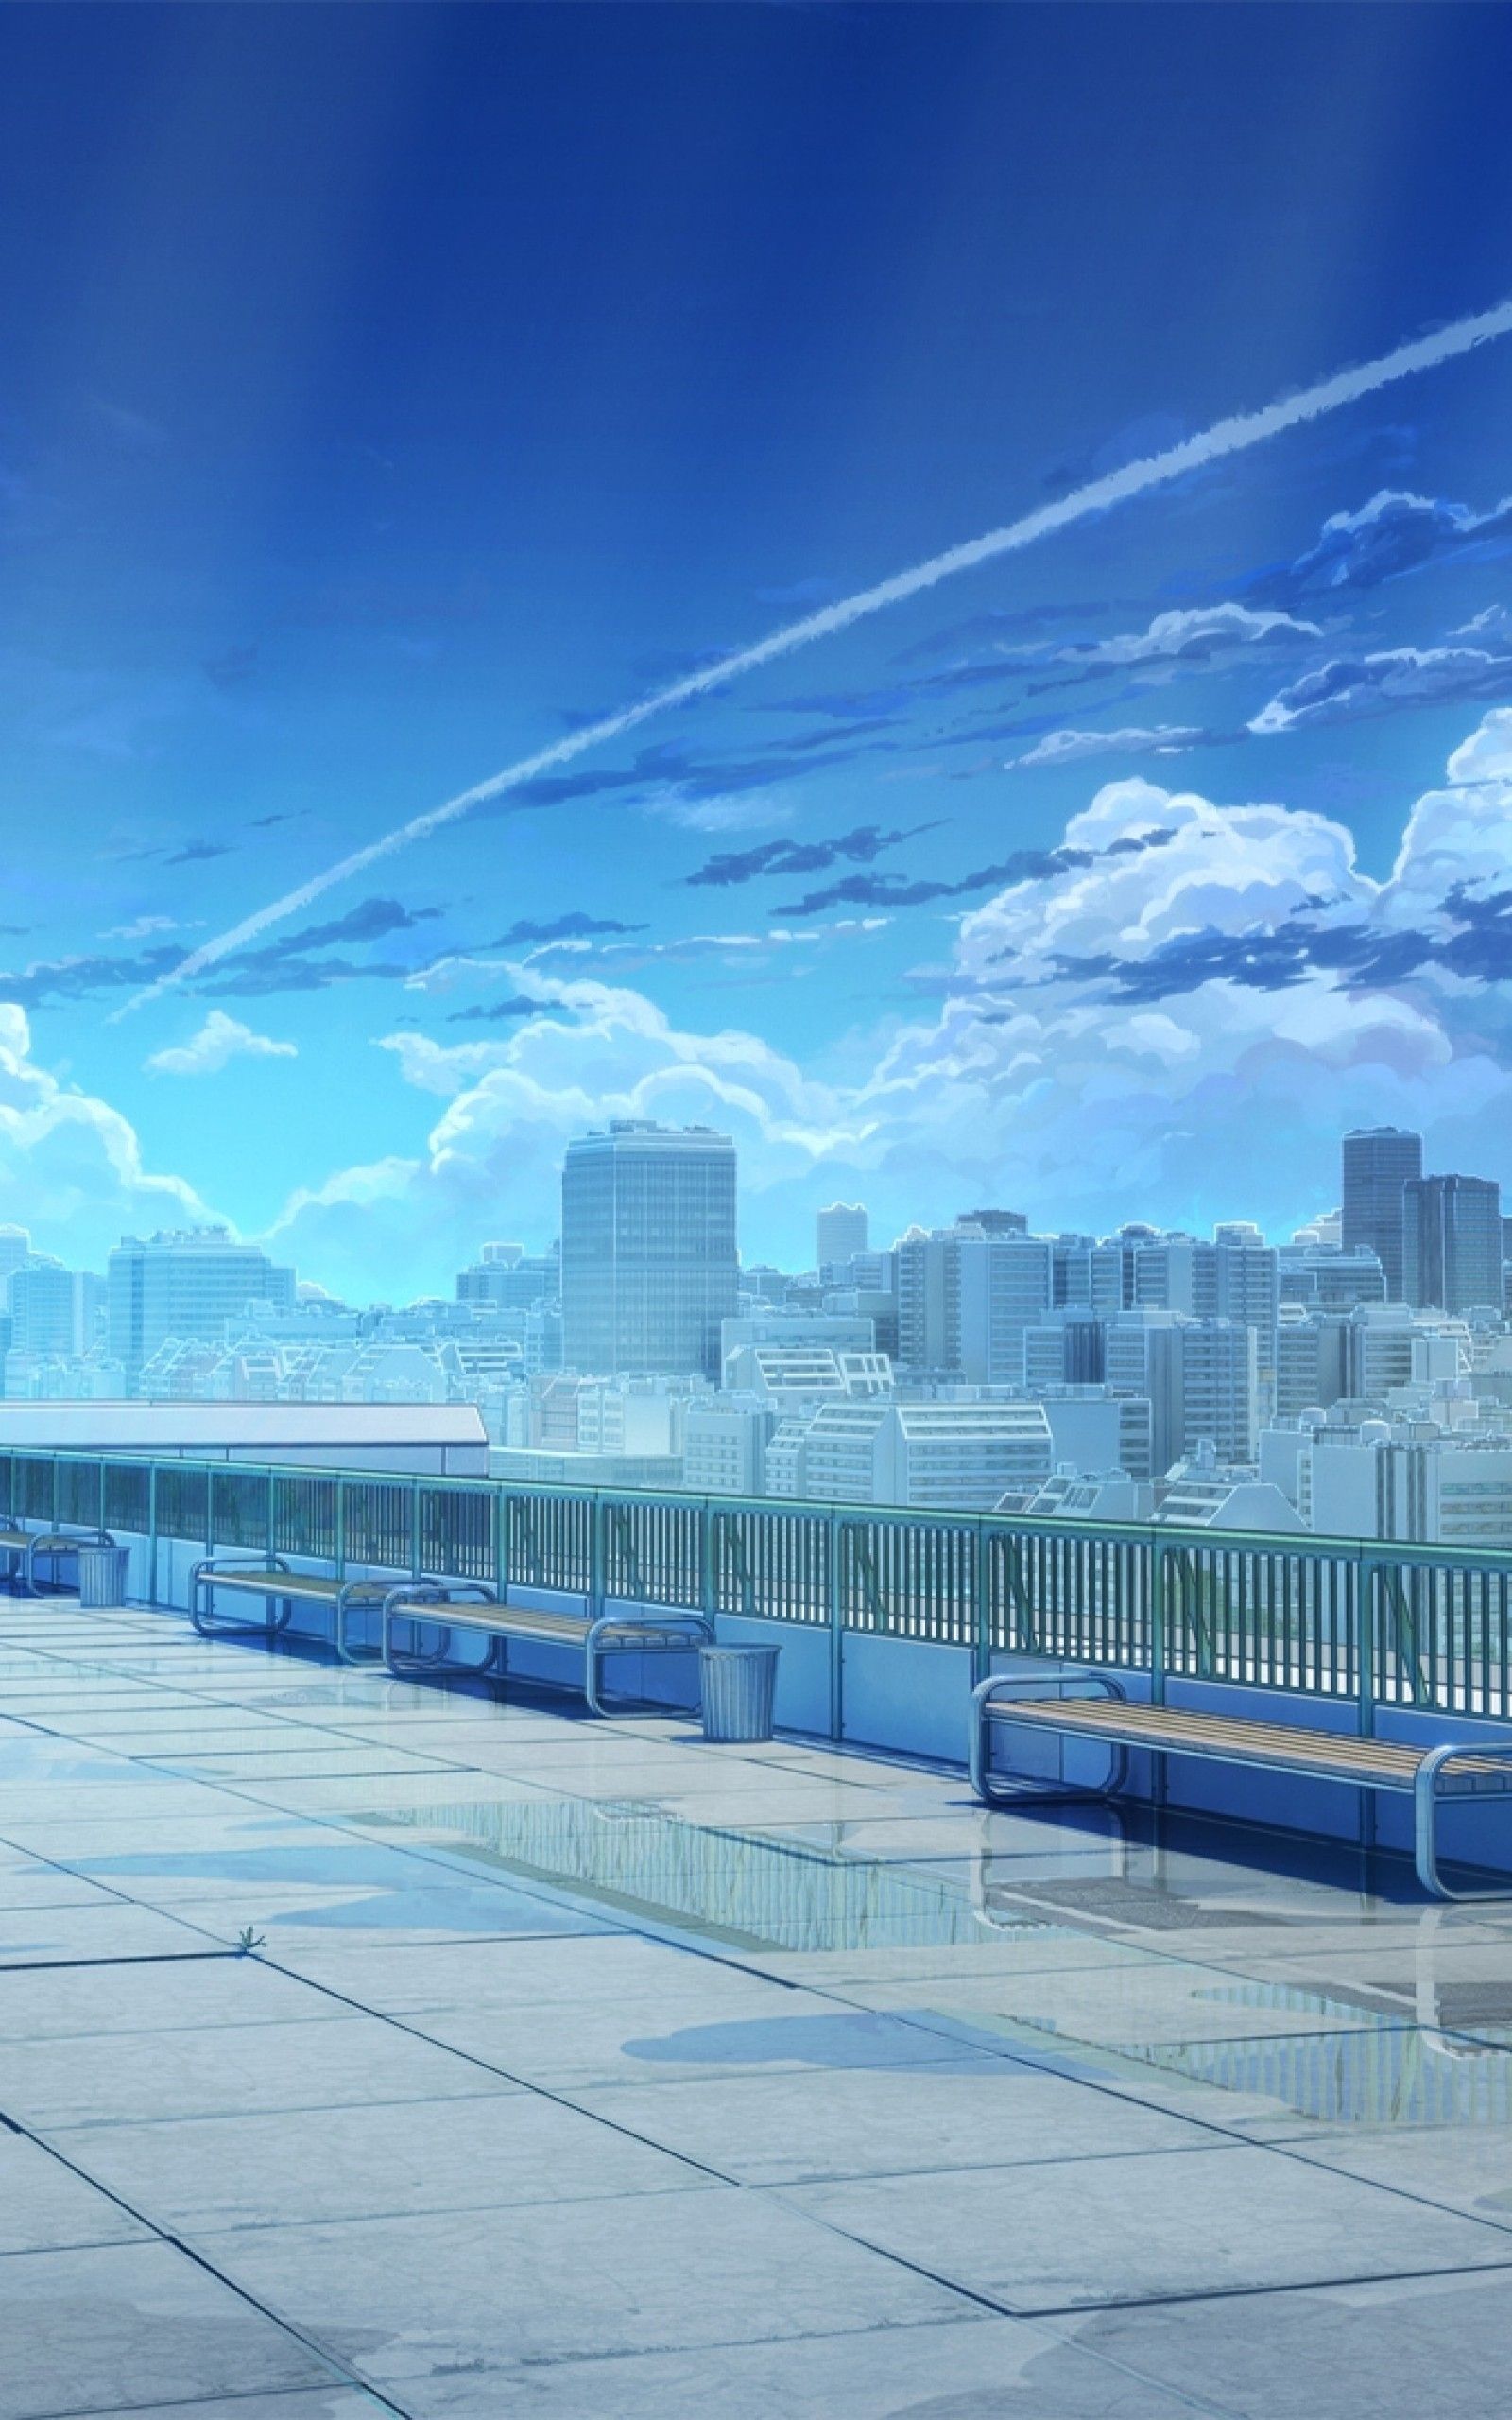 Does every Japanese school have the rooftop that we see in anime? - Quora